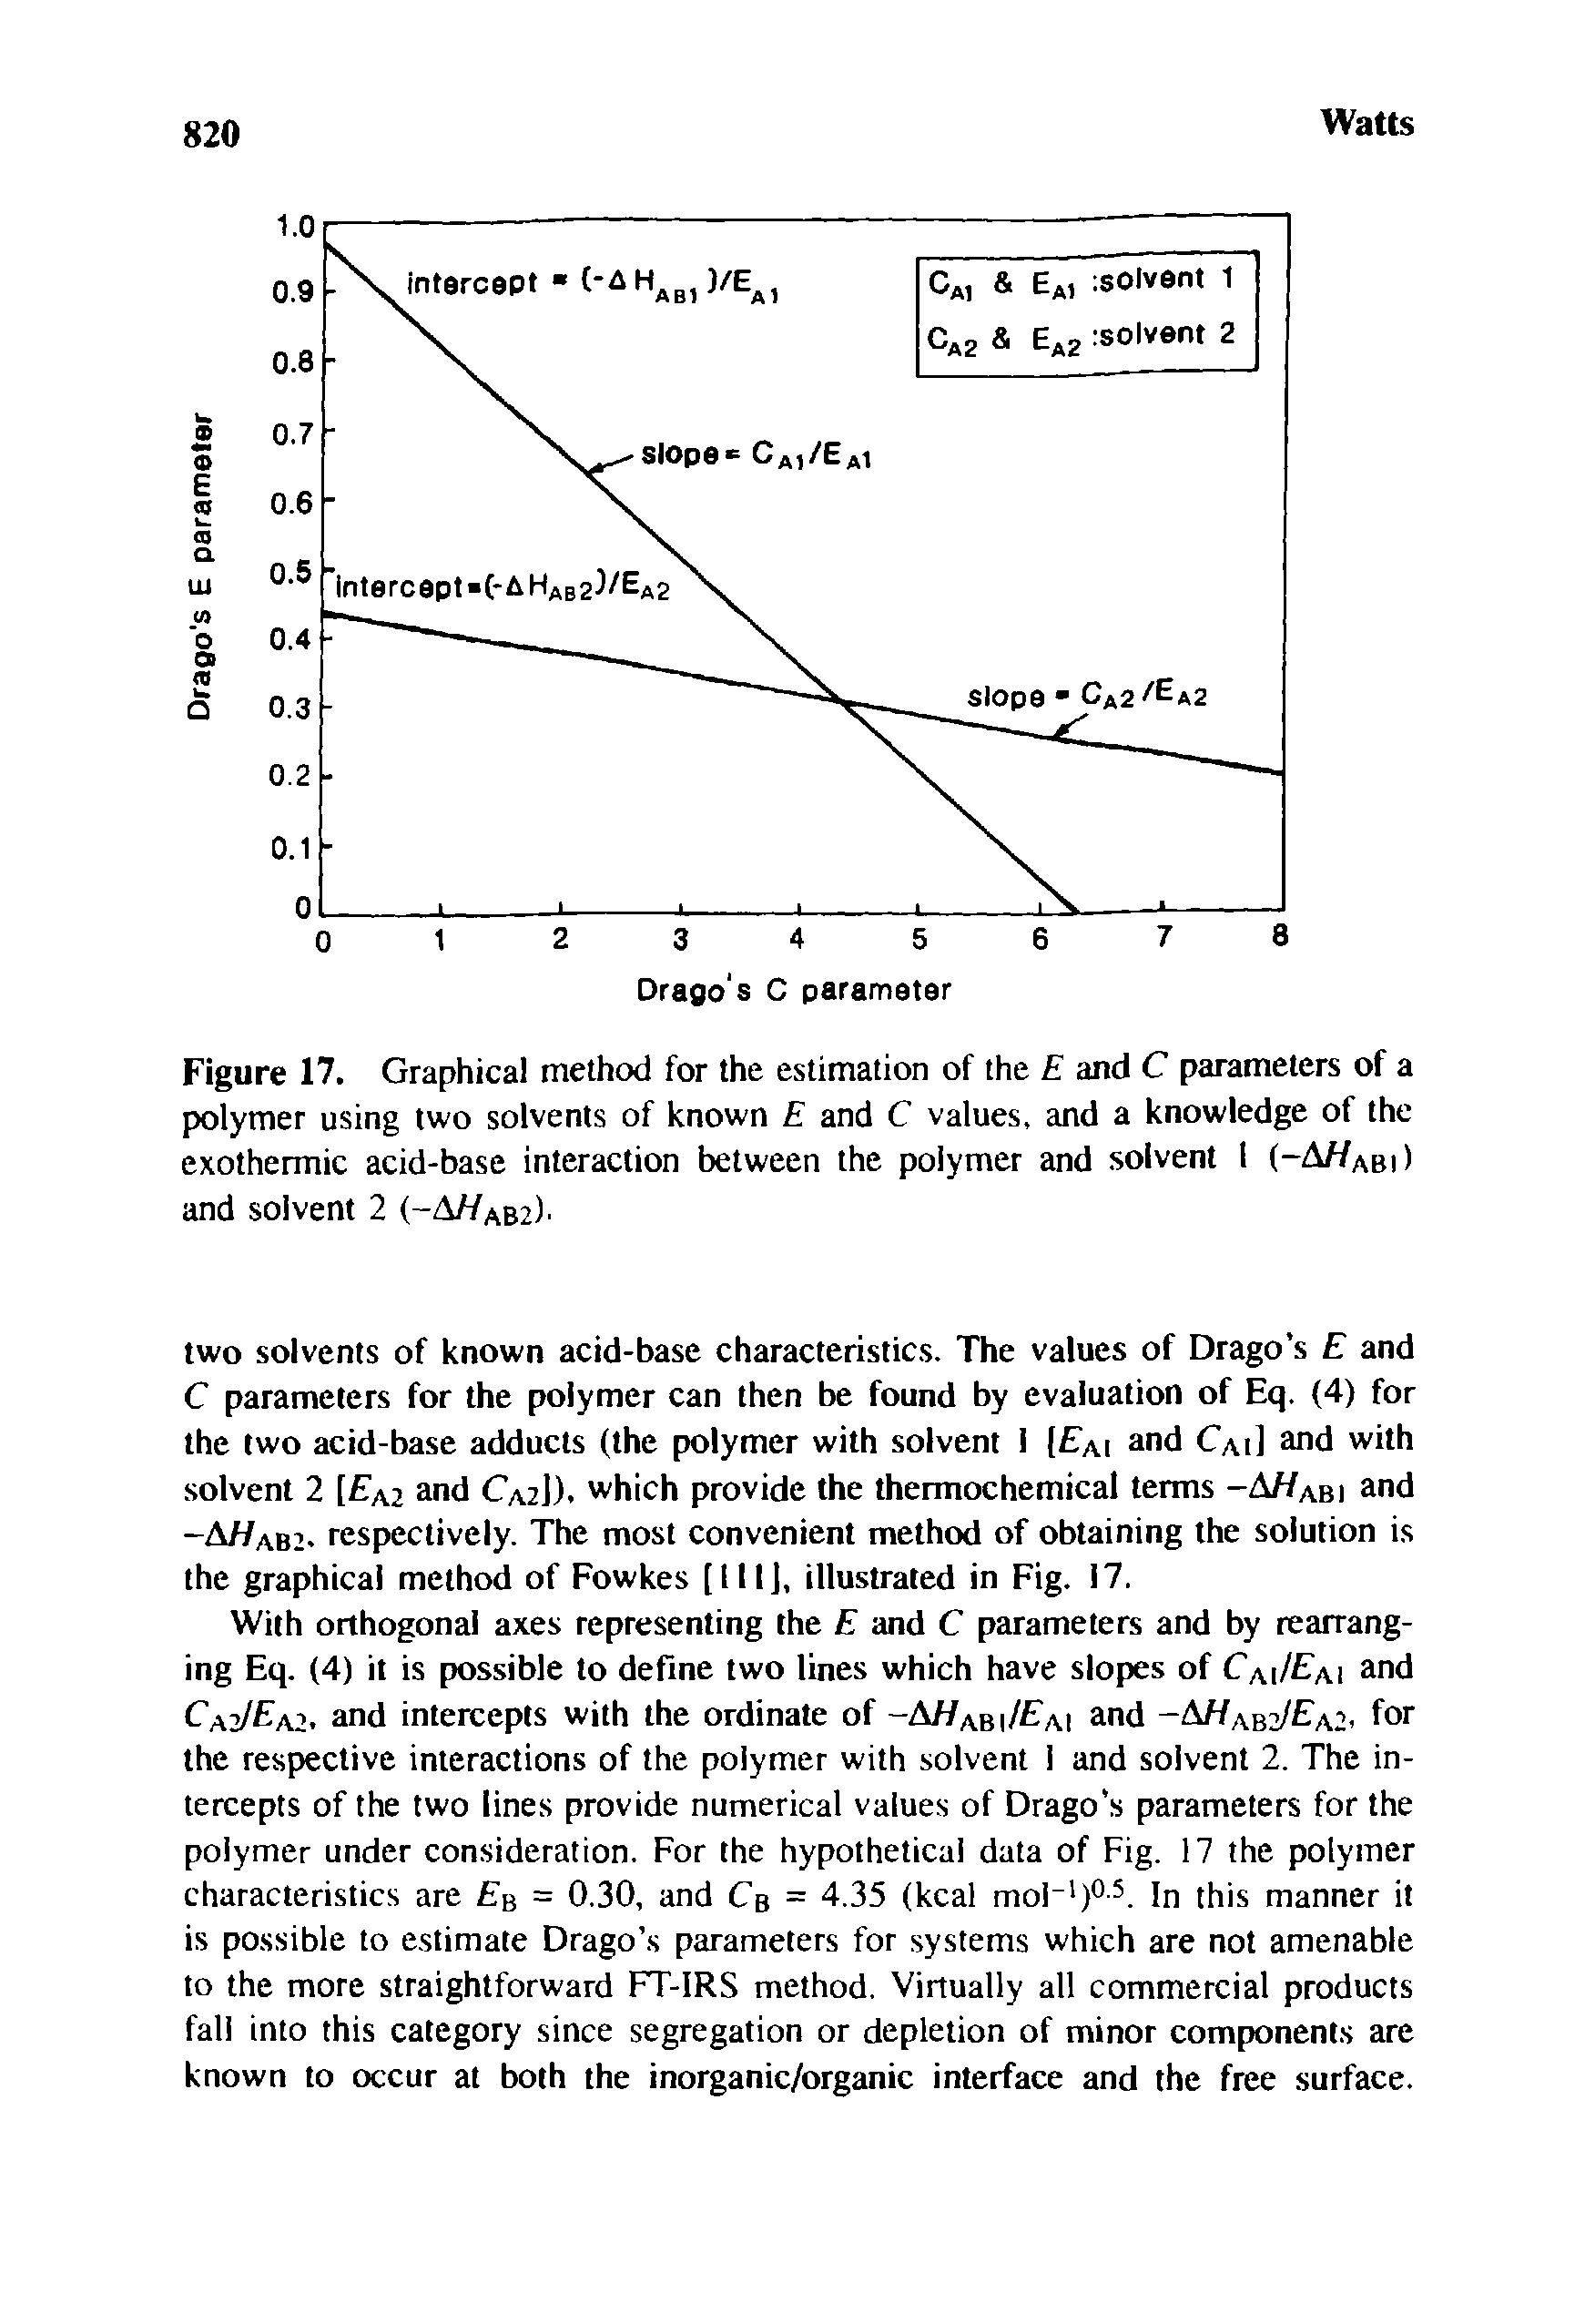 Figure 17. Graphical method for the estimation of the E and C parameters of a polymer using two solvents of known E and C values, and a knowledge of the exothermic acid-base interaction between the polymer and solvent 1 (-Z Wabi) and solvent 2 (-A//ab2) ...